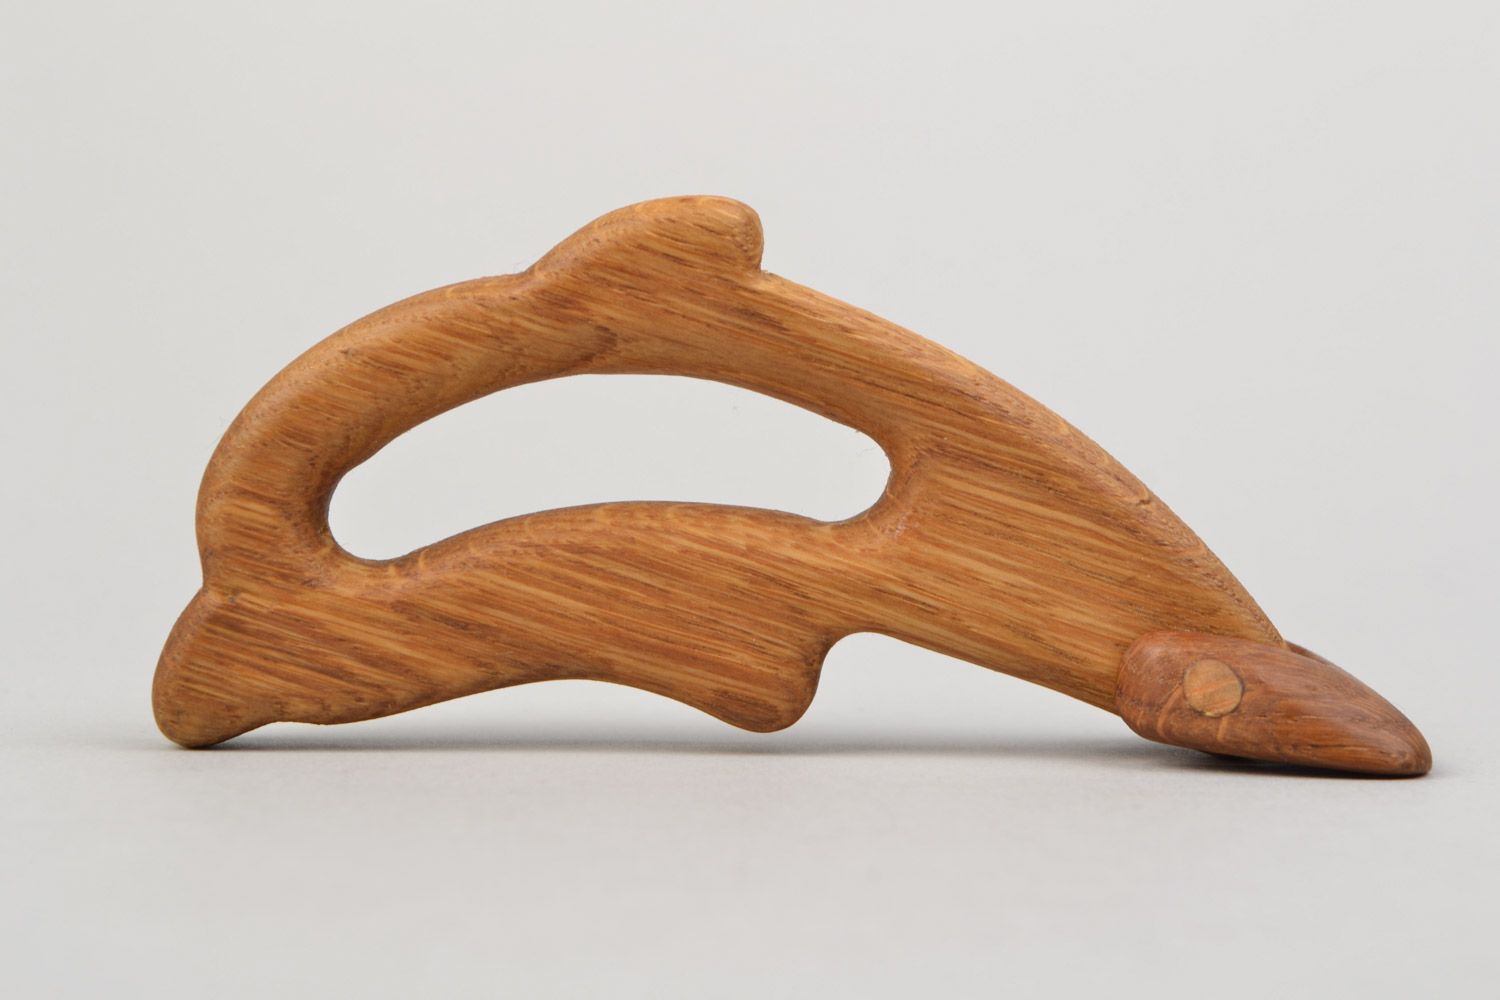 Handmade wooden teething toy in the shape of dolphin imbued with linseed oil photo 1